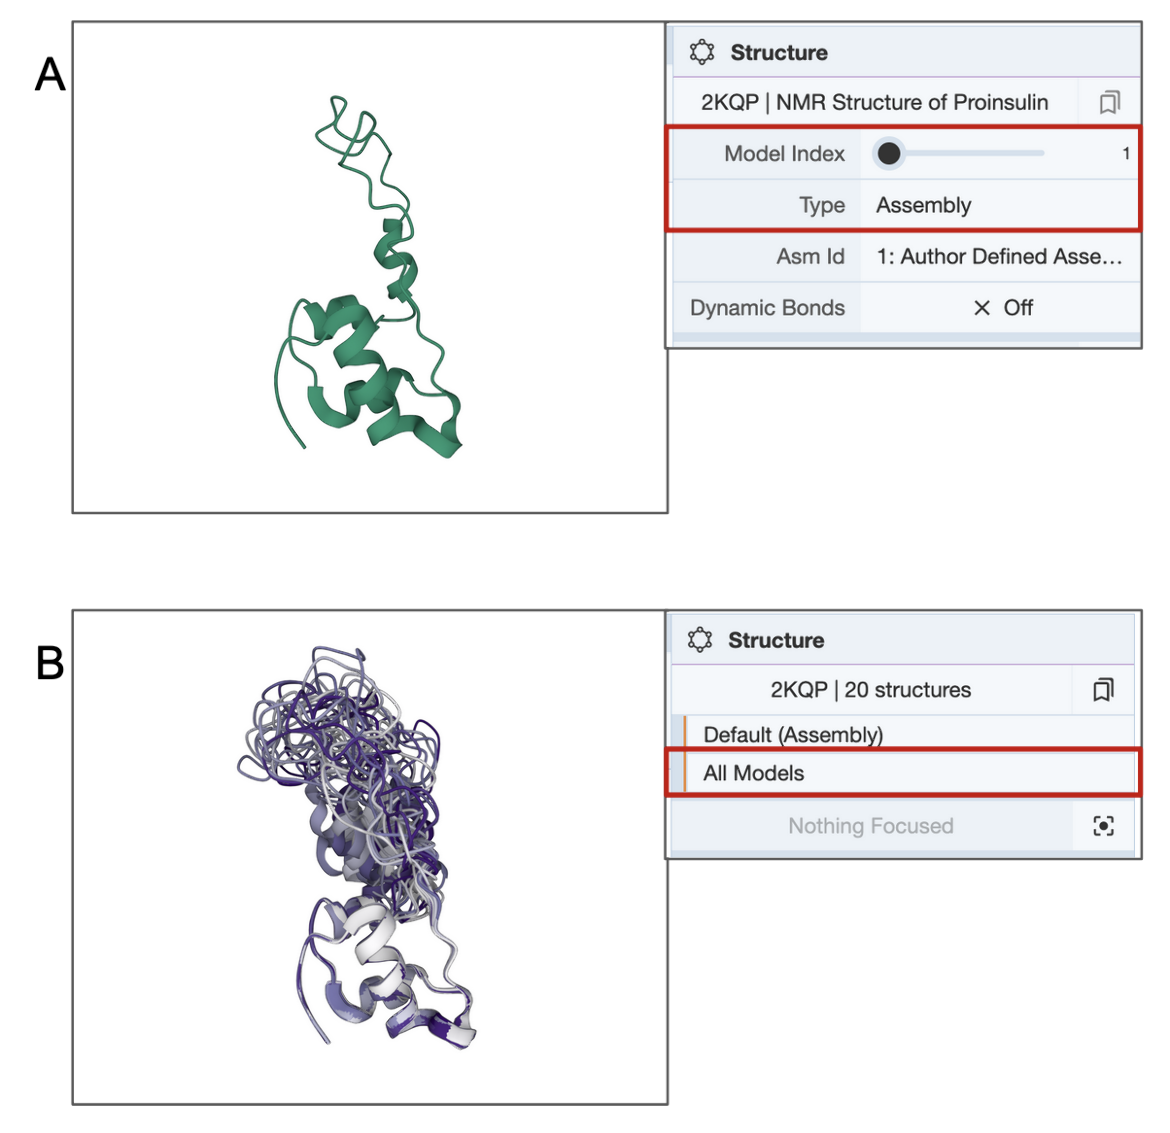 Figure 2: Different molecular views of a single structure determined by NMR (PDB ID 2kqp). A. a single model (from the deposited coordinates); B. The full ensemble of NMR structures. 